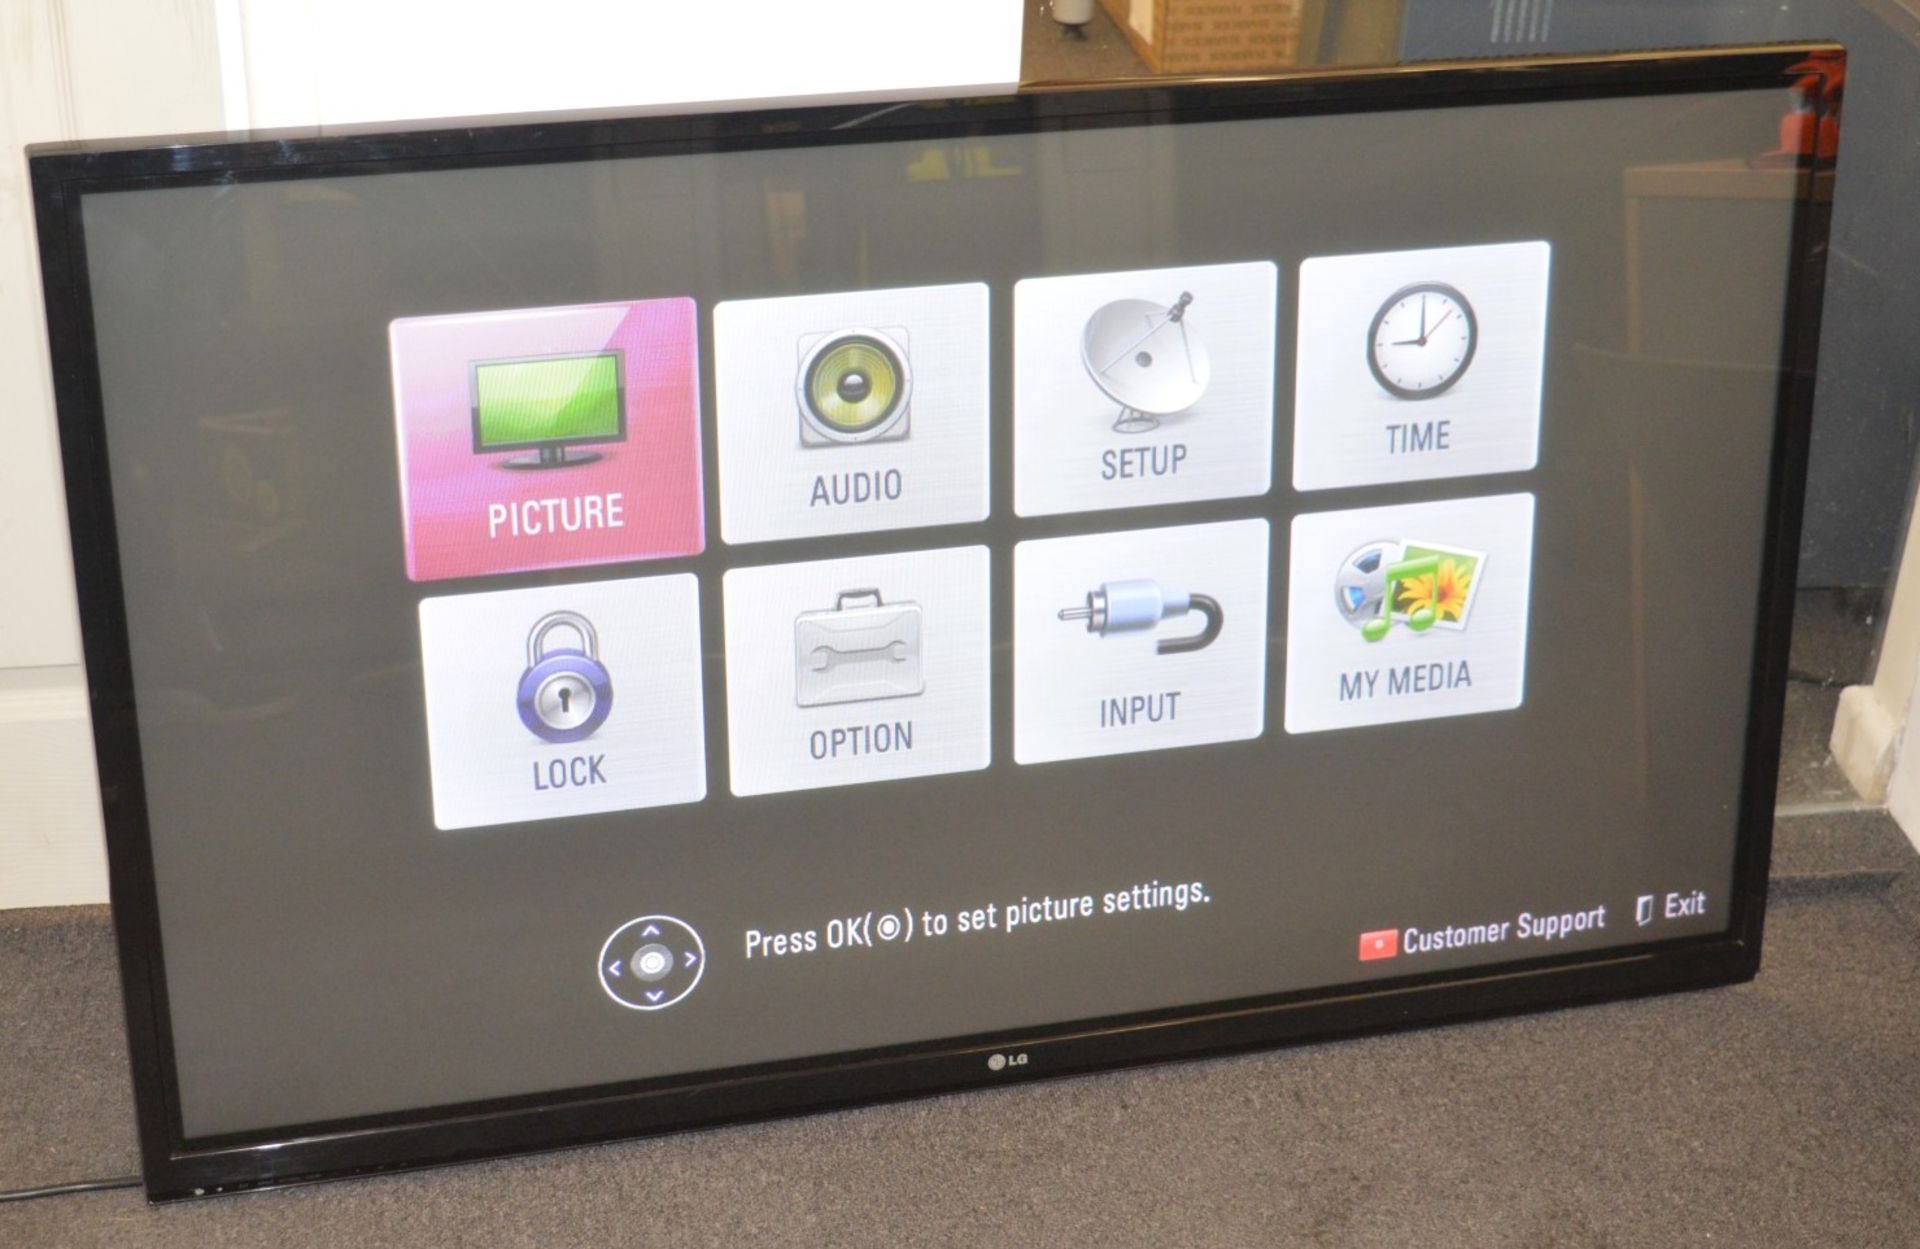 1 x LG 50PA4500 50-inch HD Ready Plasma TV with Freeview and 2 HDMI Ports - CL150 - Working As - Image 2 of 4